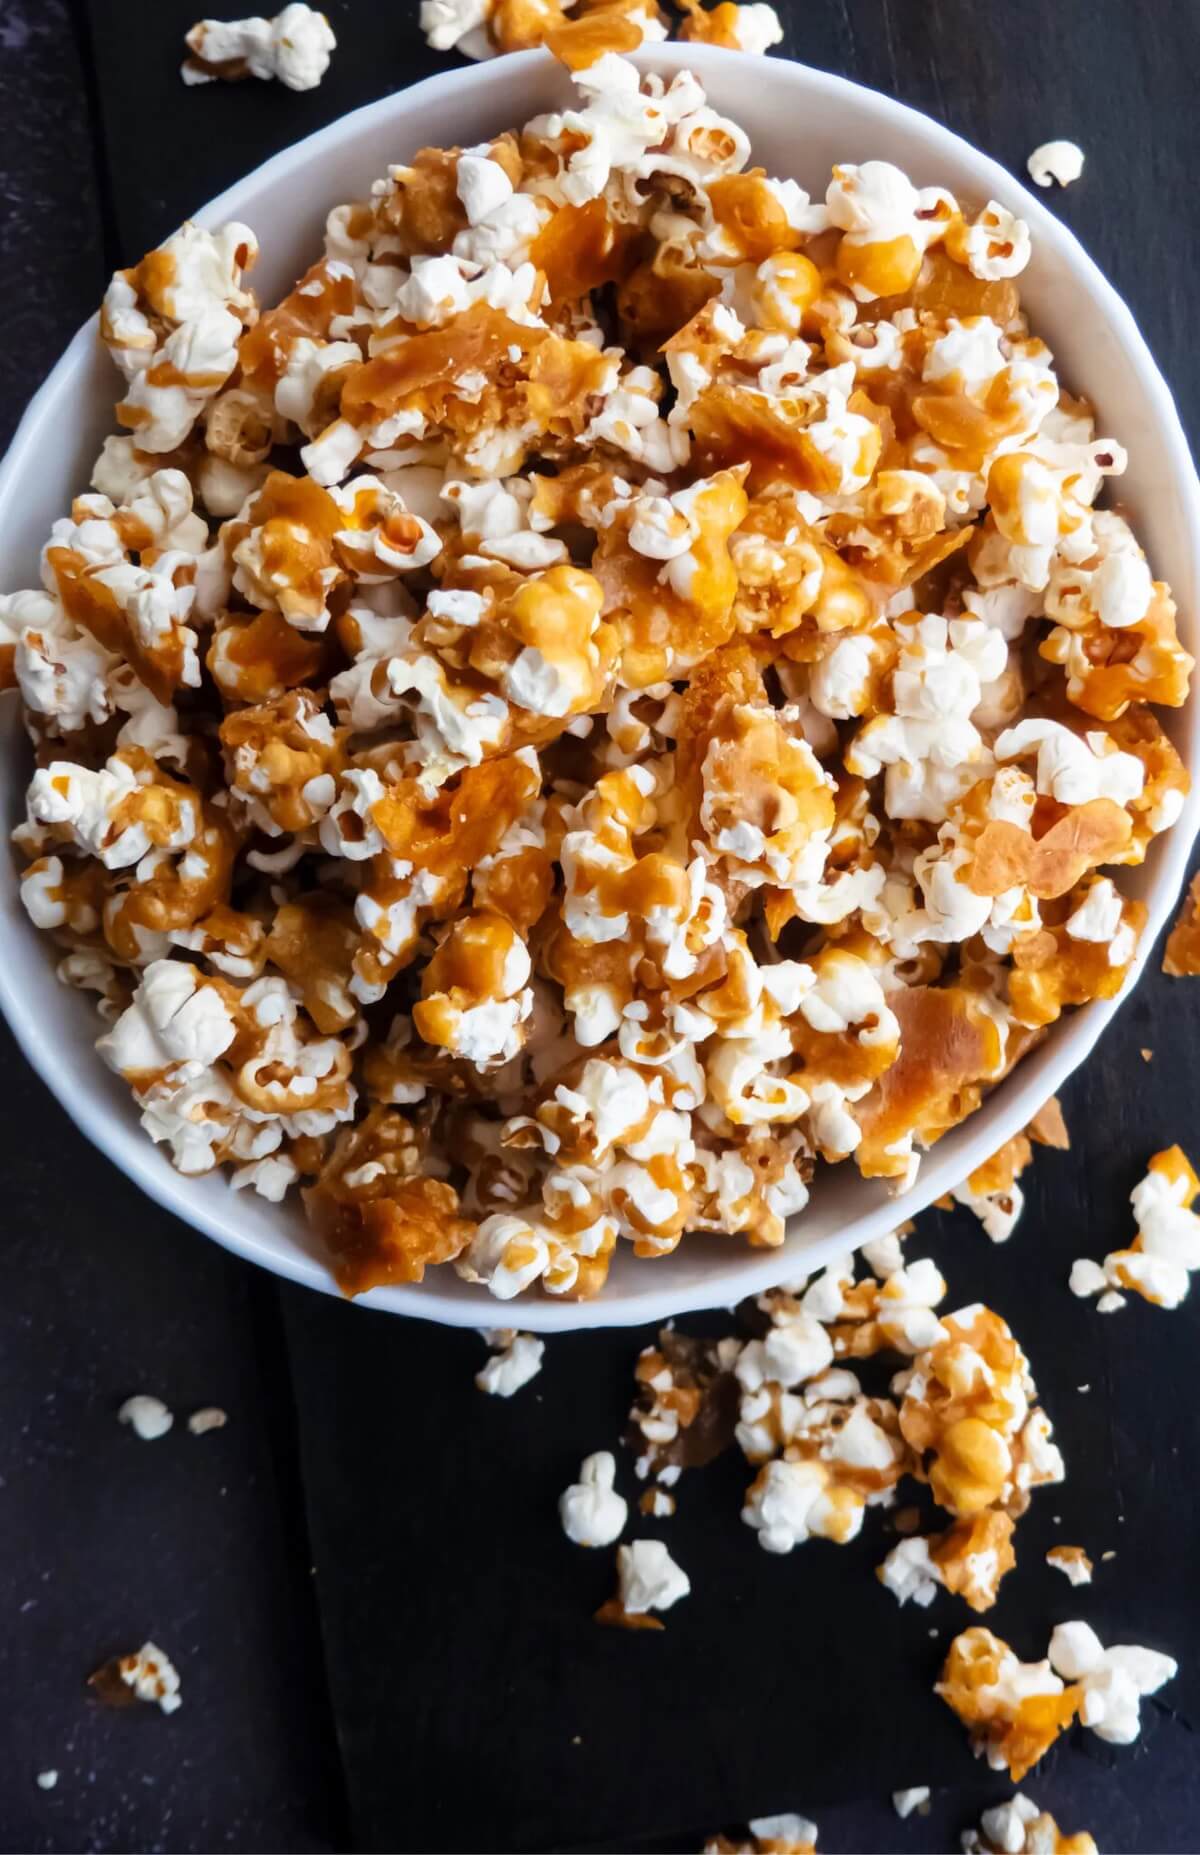 Caramel popcorn overflowing from a bowl